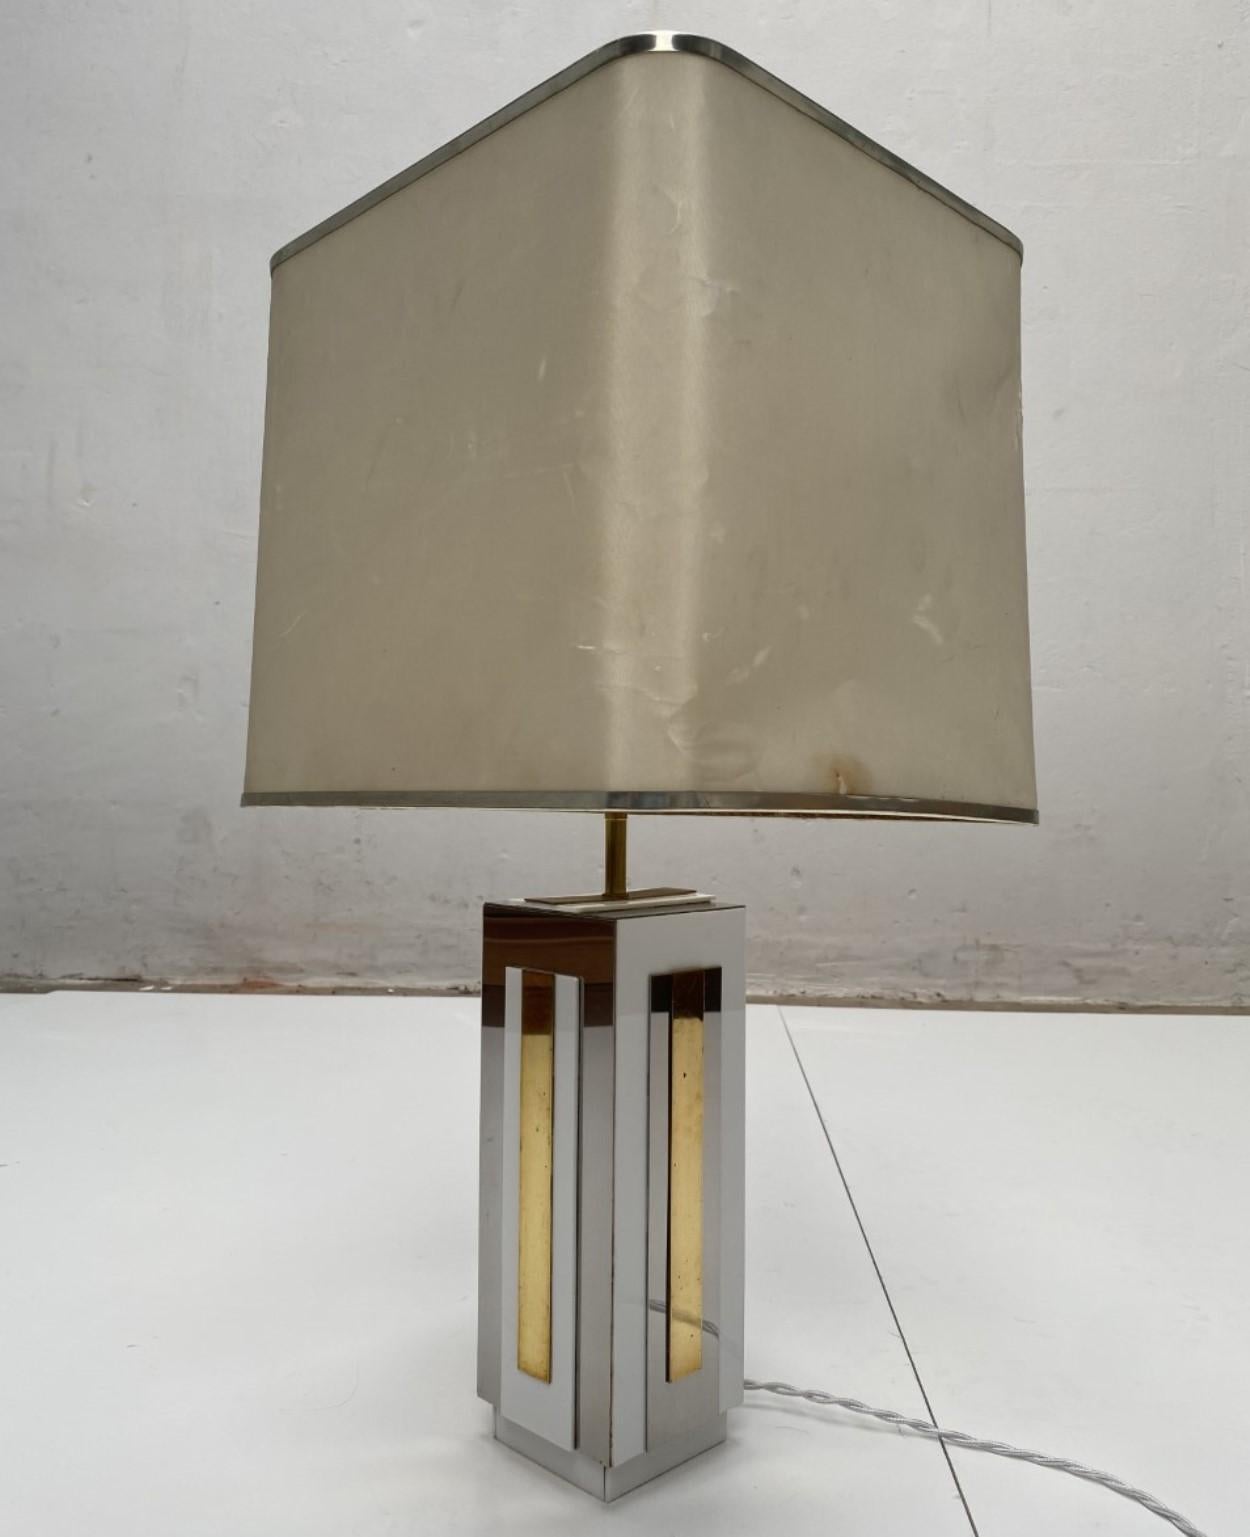 Hand-Crafted Sculptural Relief Table Lamp by Sculptor 'PH Jean' 1970 Brass Inox Lucite Signed For Sale